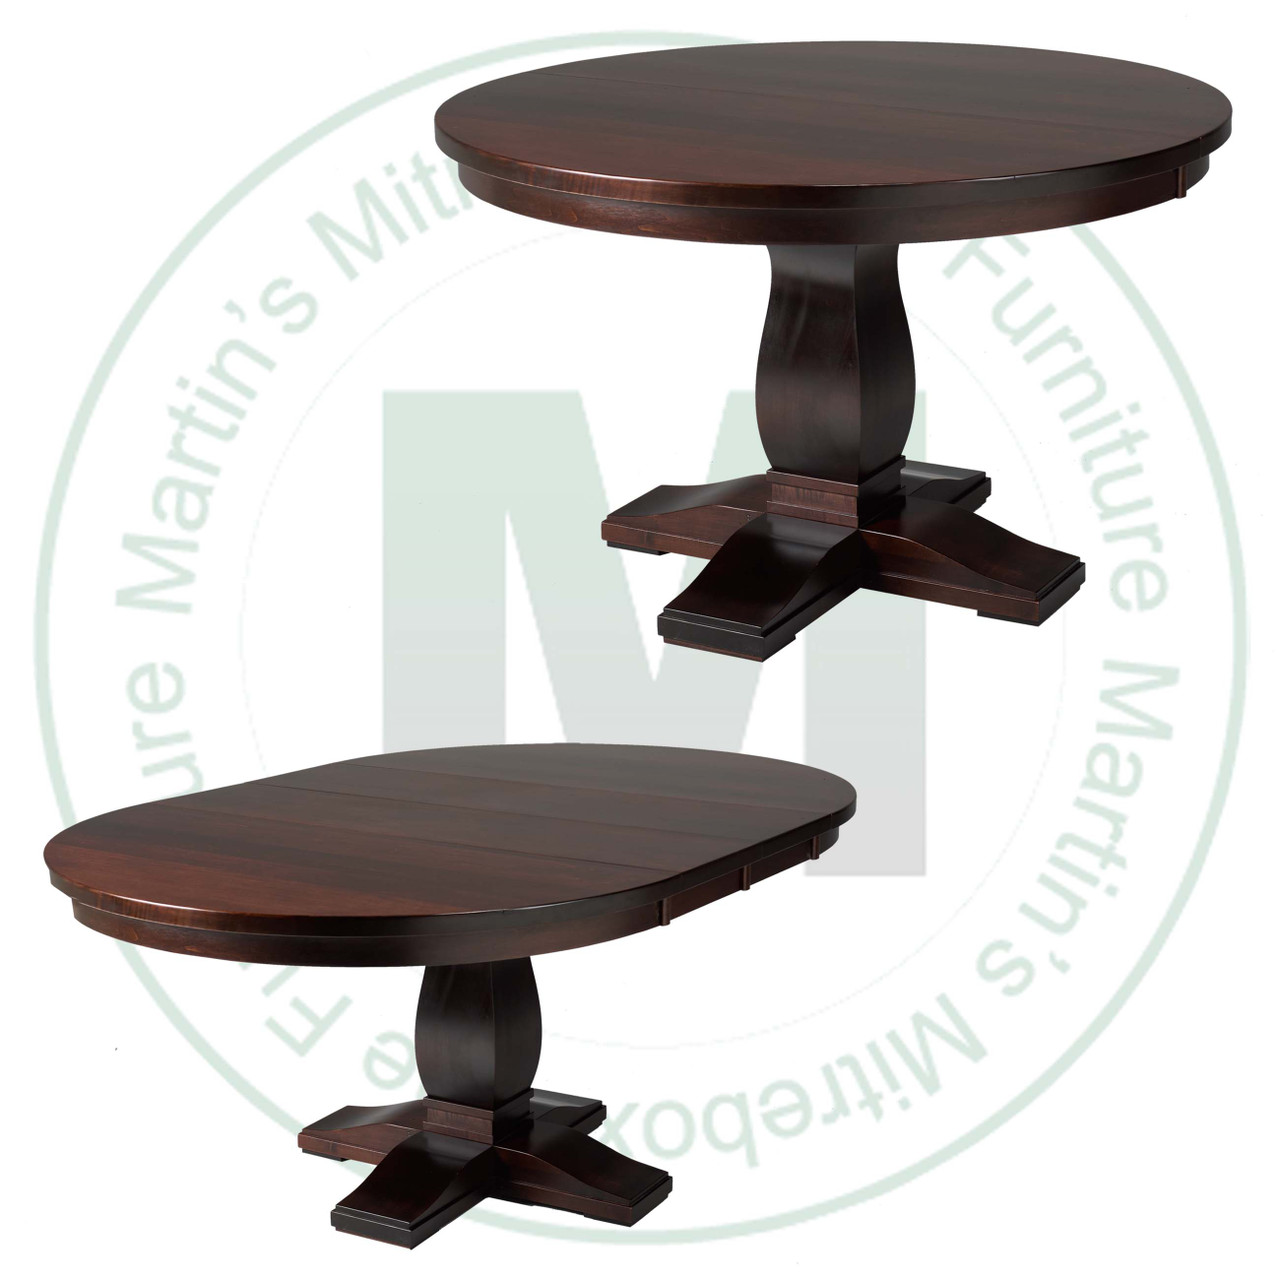 Oak Valencia Single Pedestal Table 54''D x 54''W x 30''H With 1 - 12'' Leaf Table. Table Has 1'' Thick Top.